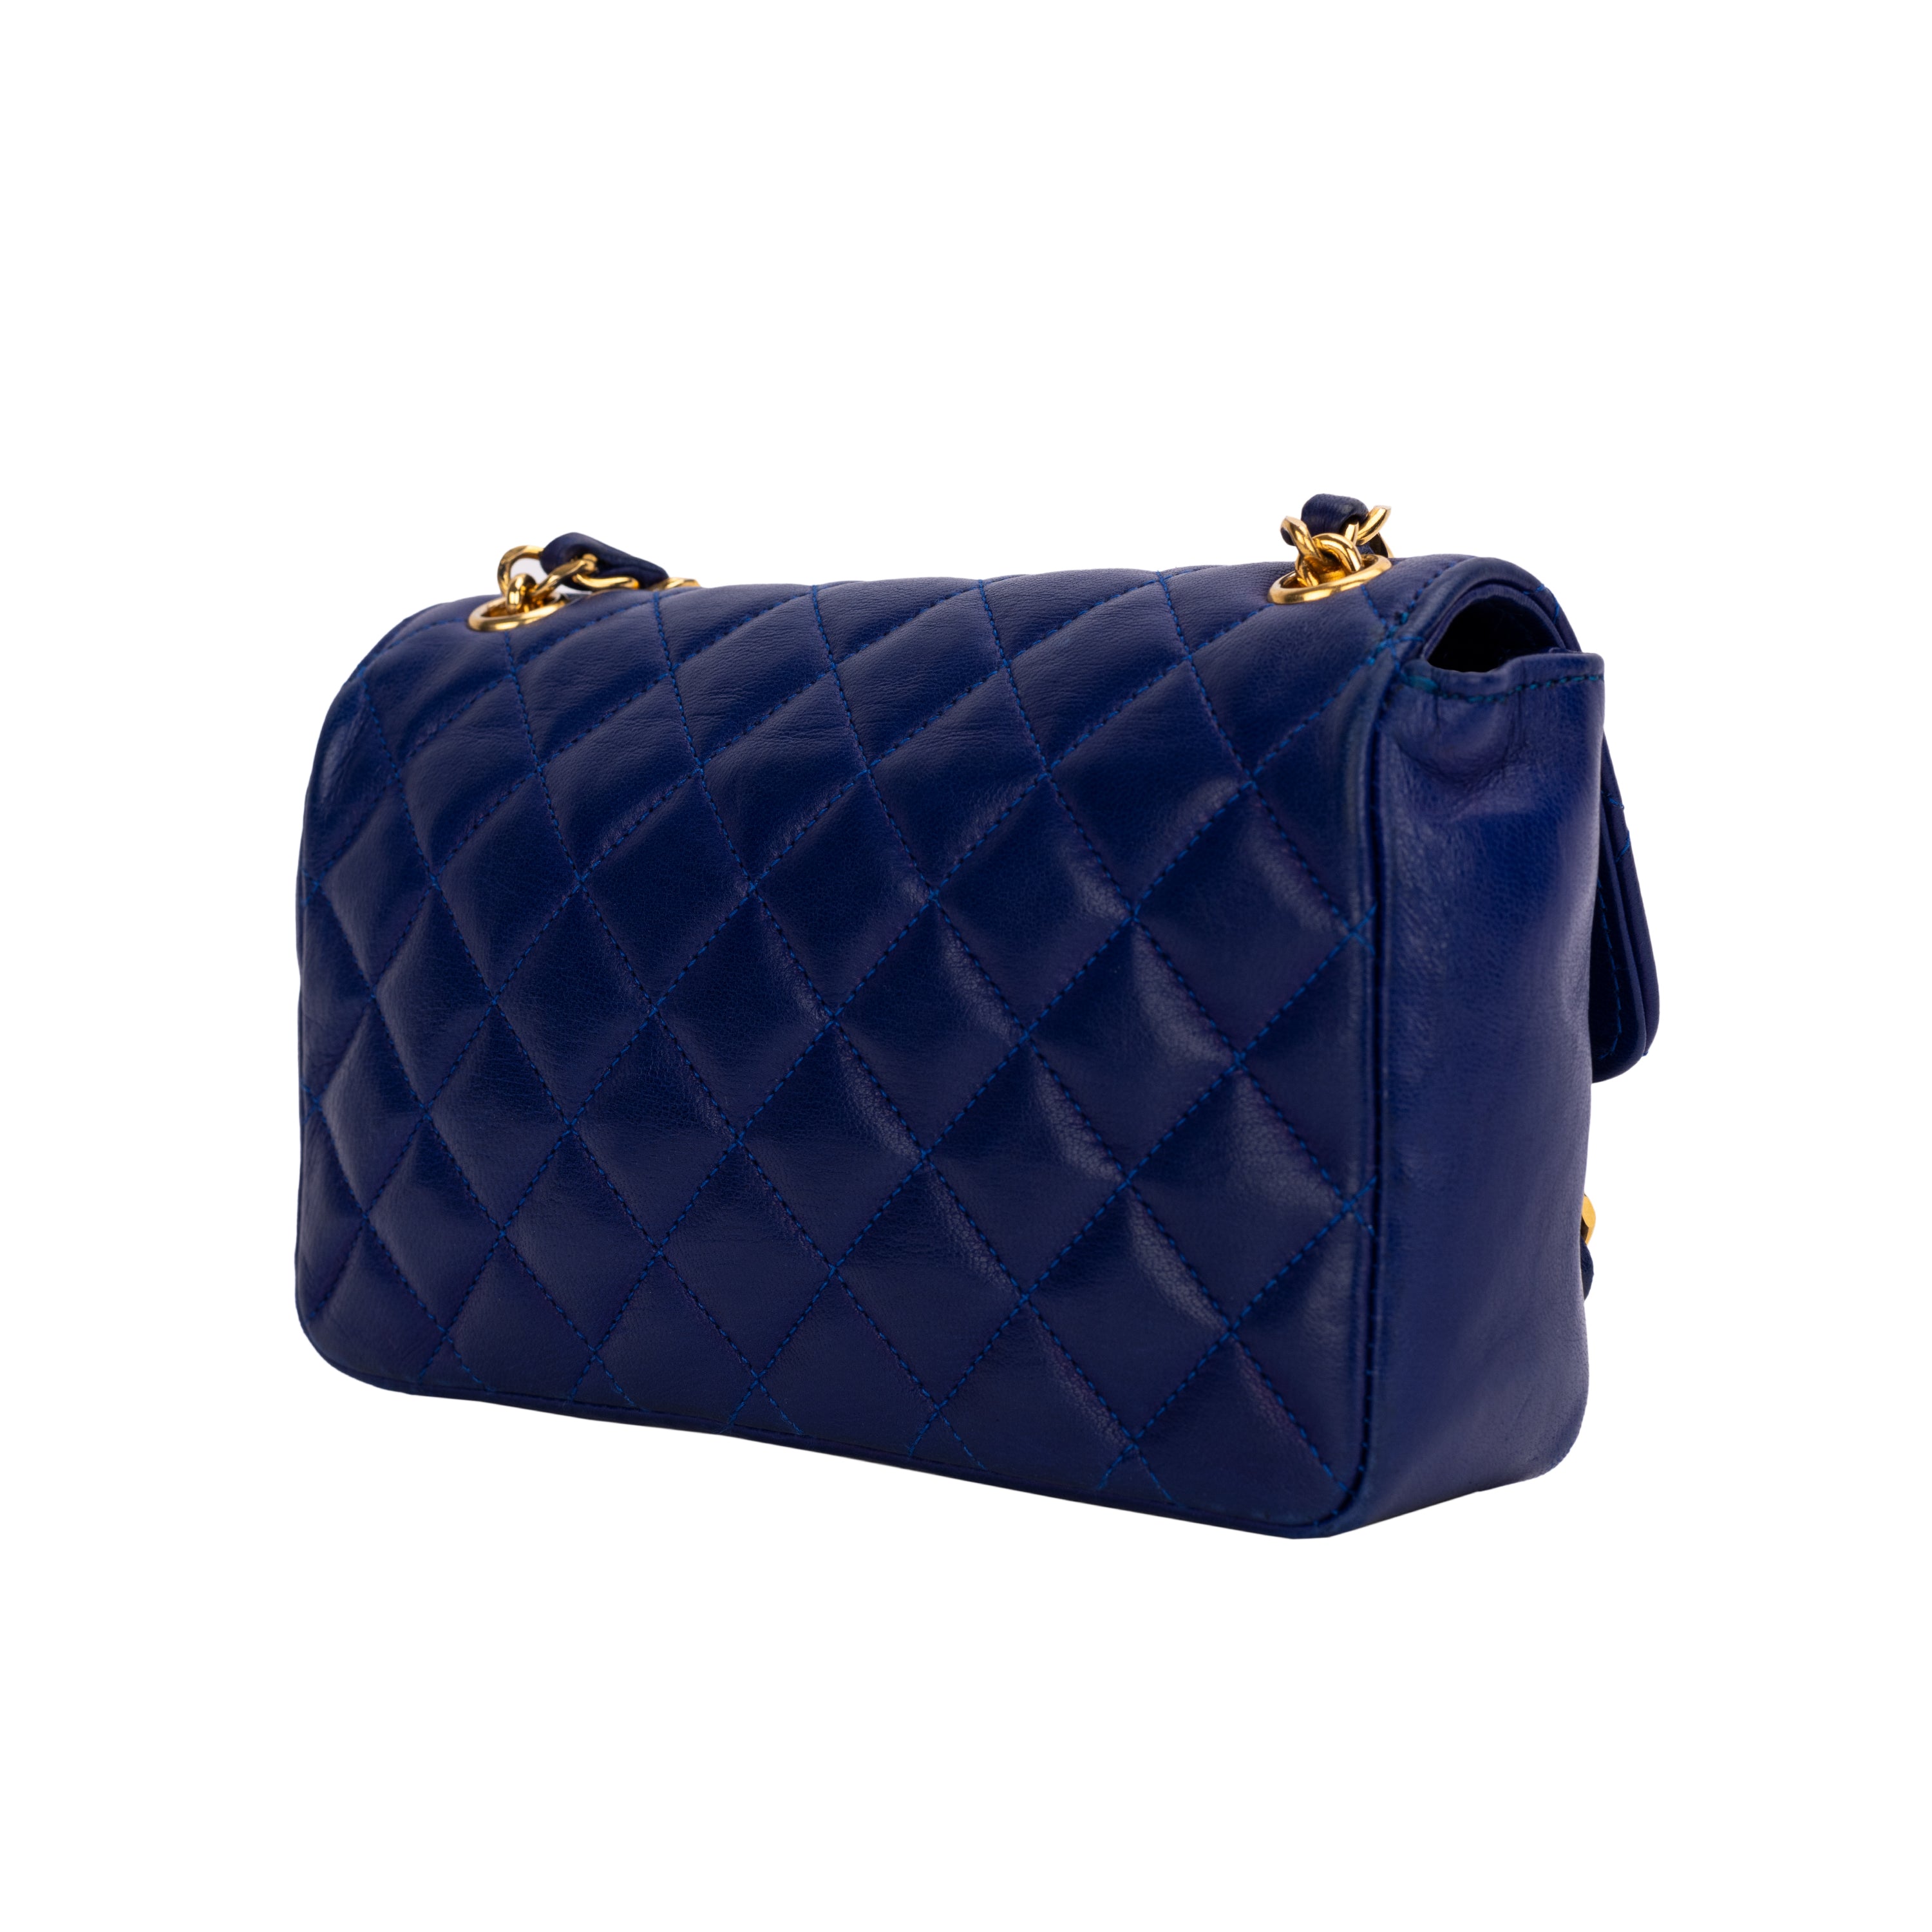 Chanel Blue Vintage Quilted Mini Flap - '90s